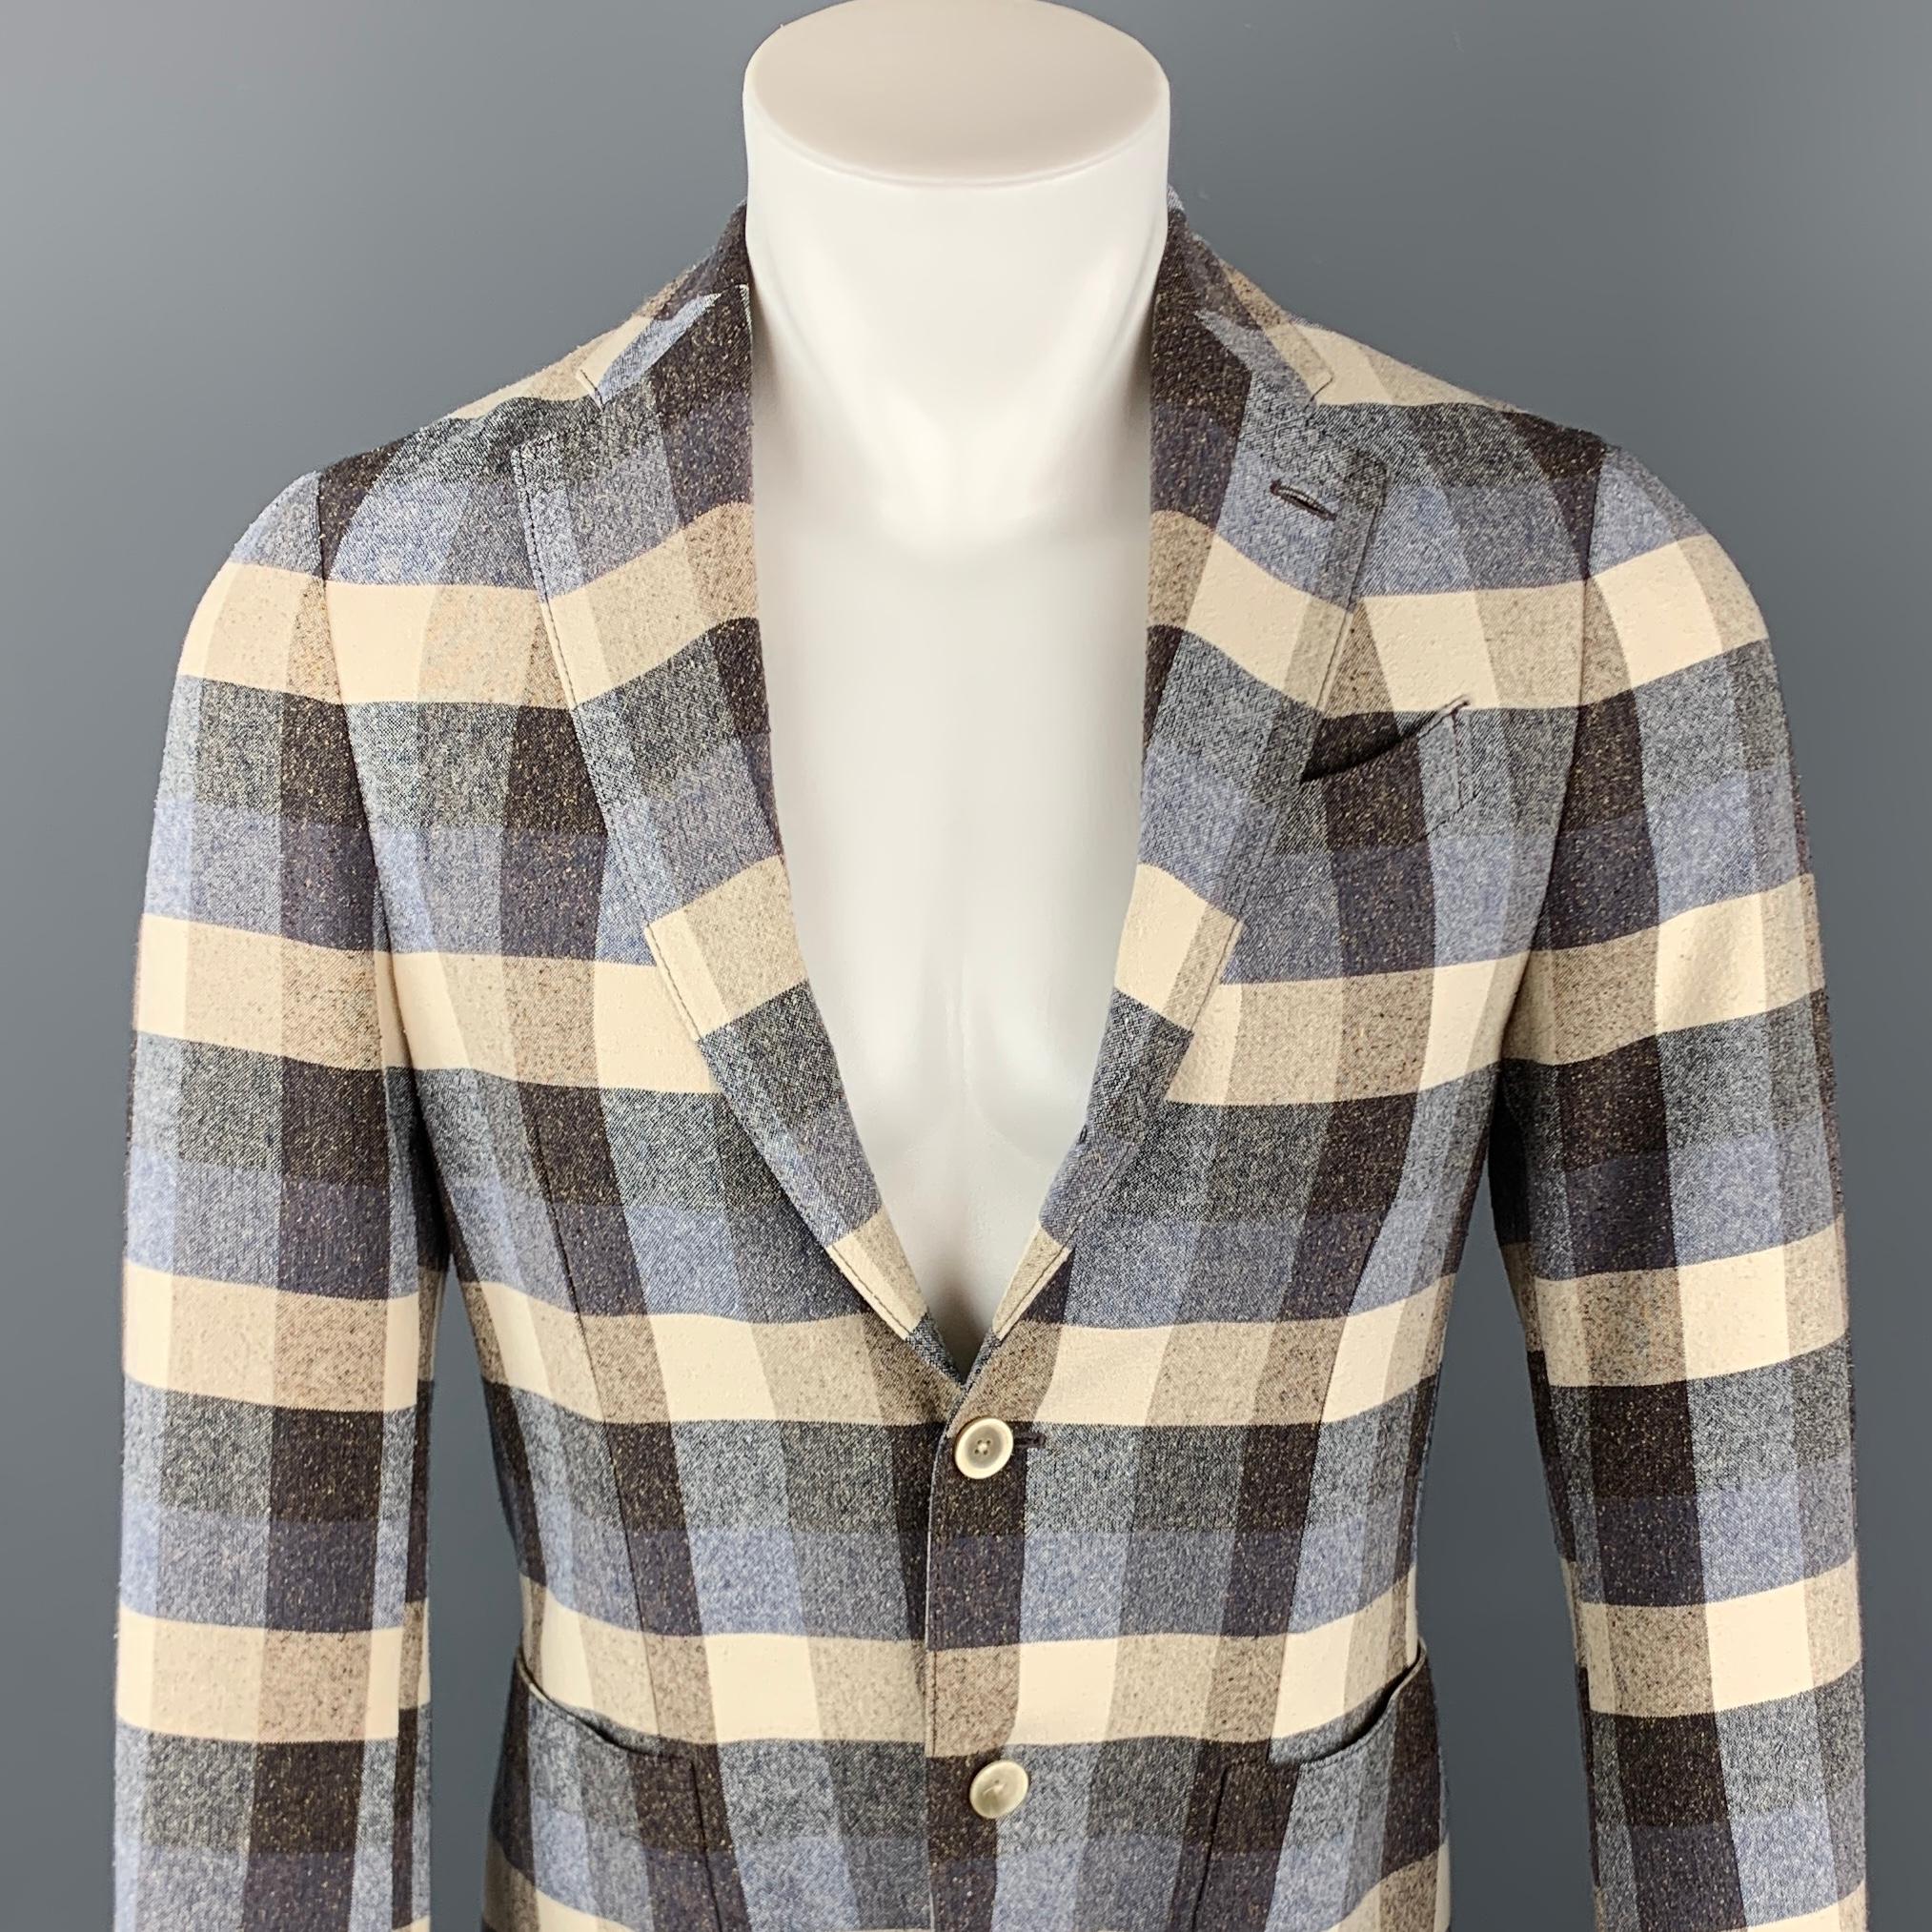 LARDINI sport coat comes in a navy & brown checkered wool / polyester featuring a peak lapel, patch pockets, and a two button closure. Made in Italy.

Excellent Pre-Owned Condition.
Marked: 44

Measurements:

Shoulder: 15 in.
Chest: 36 in.
Sleeve: